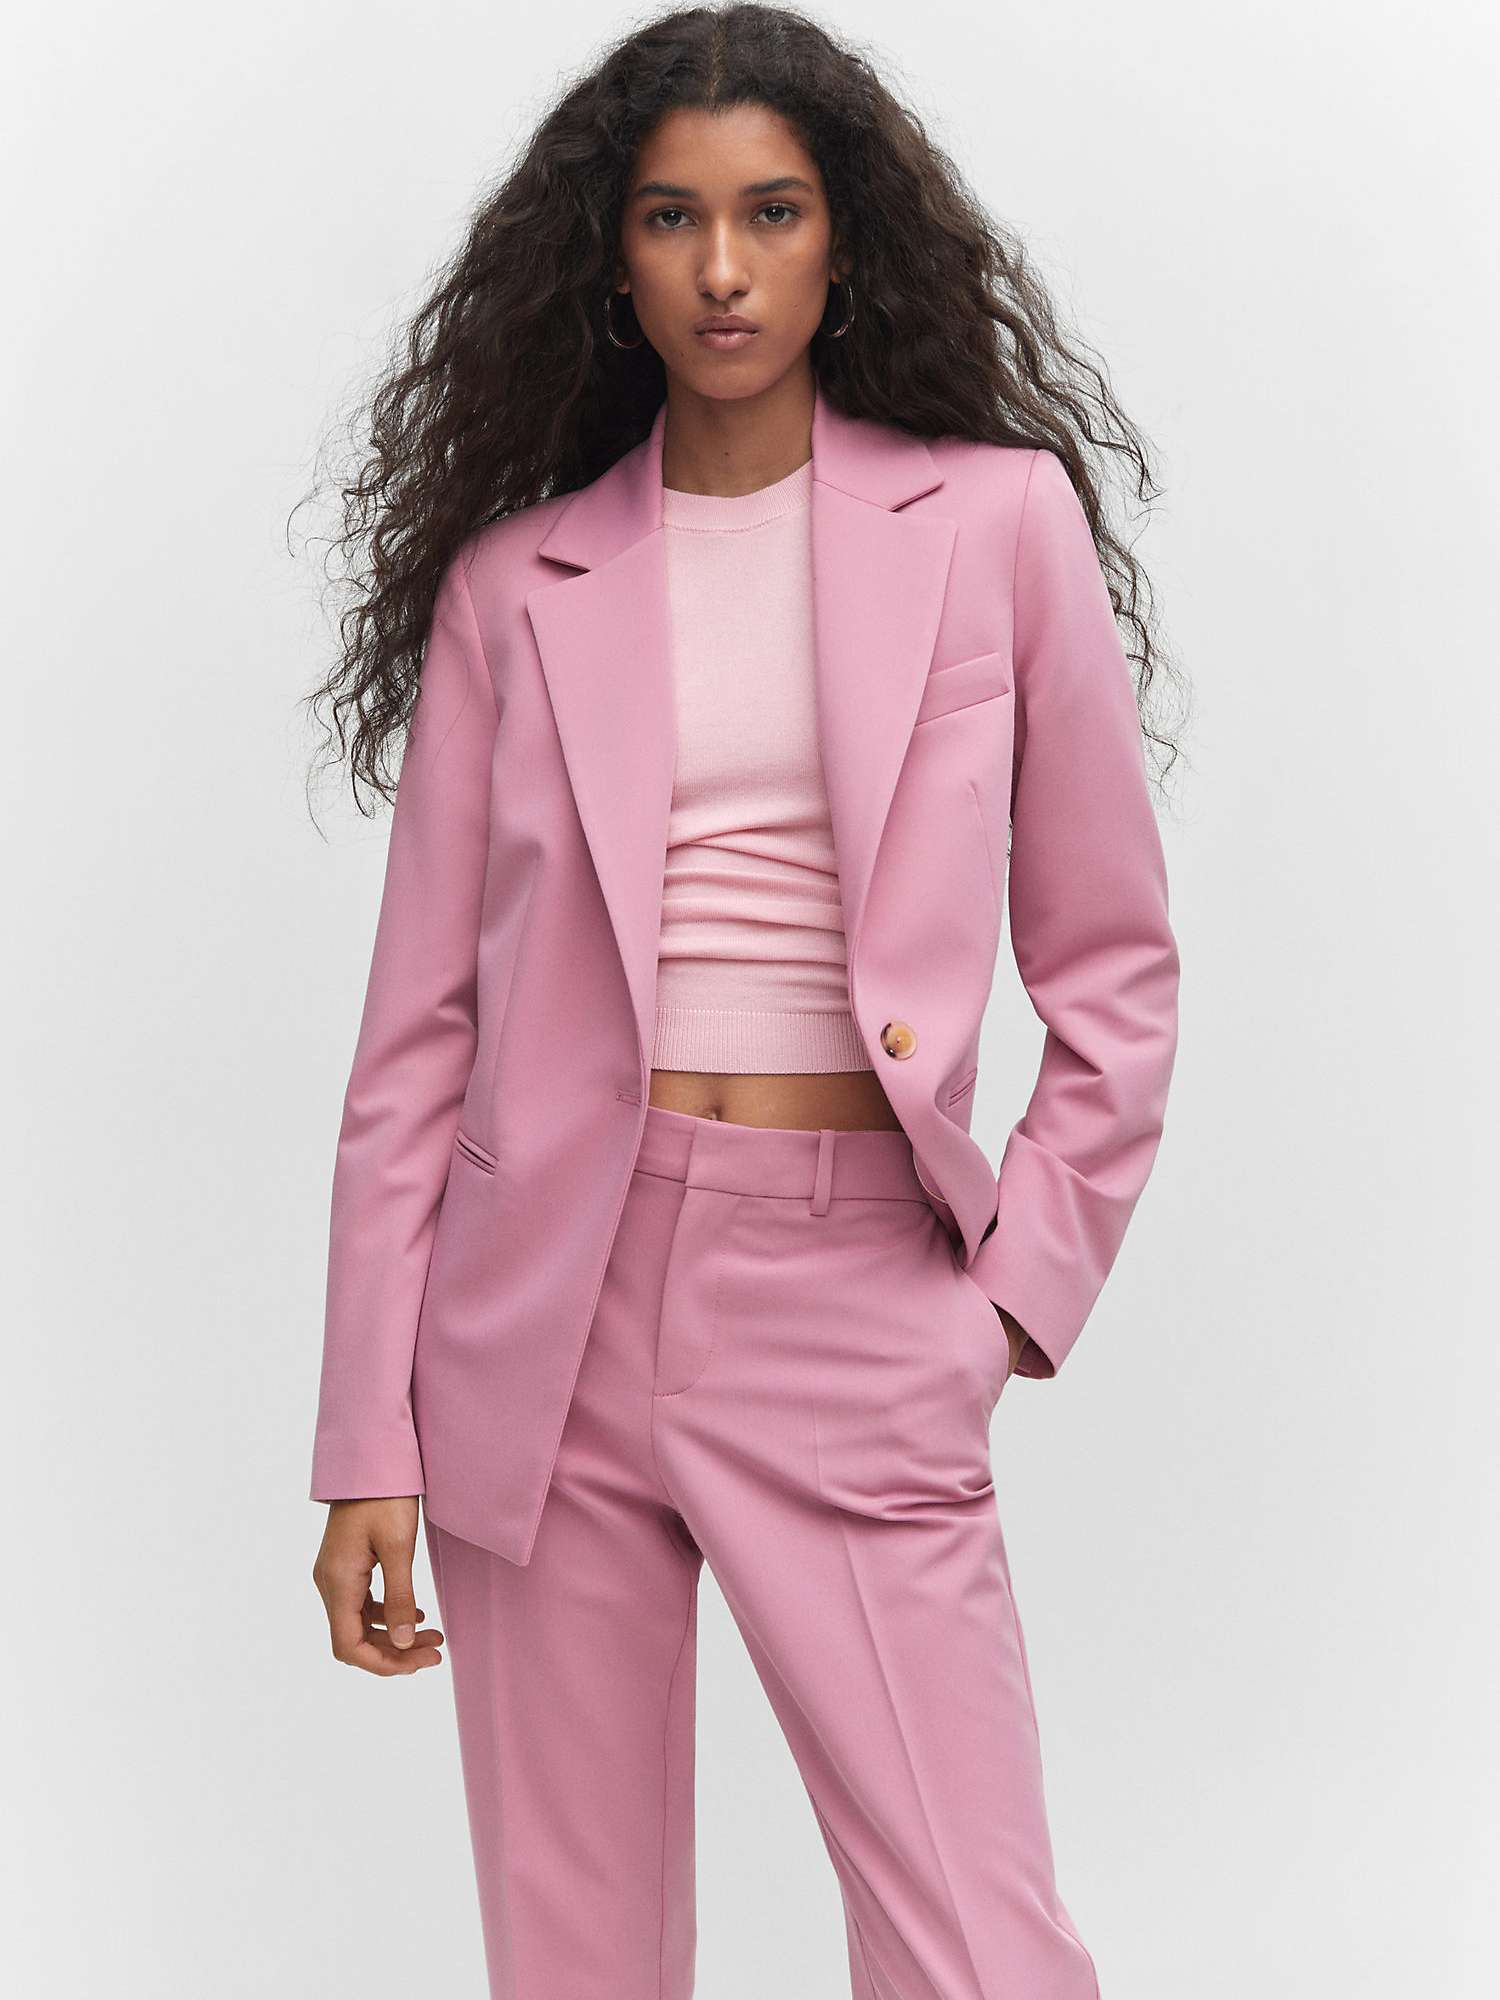 Mango Boreal Straight Suit Trousers, Pink at John Lewis & Partners